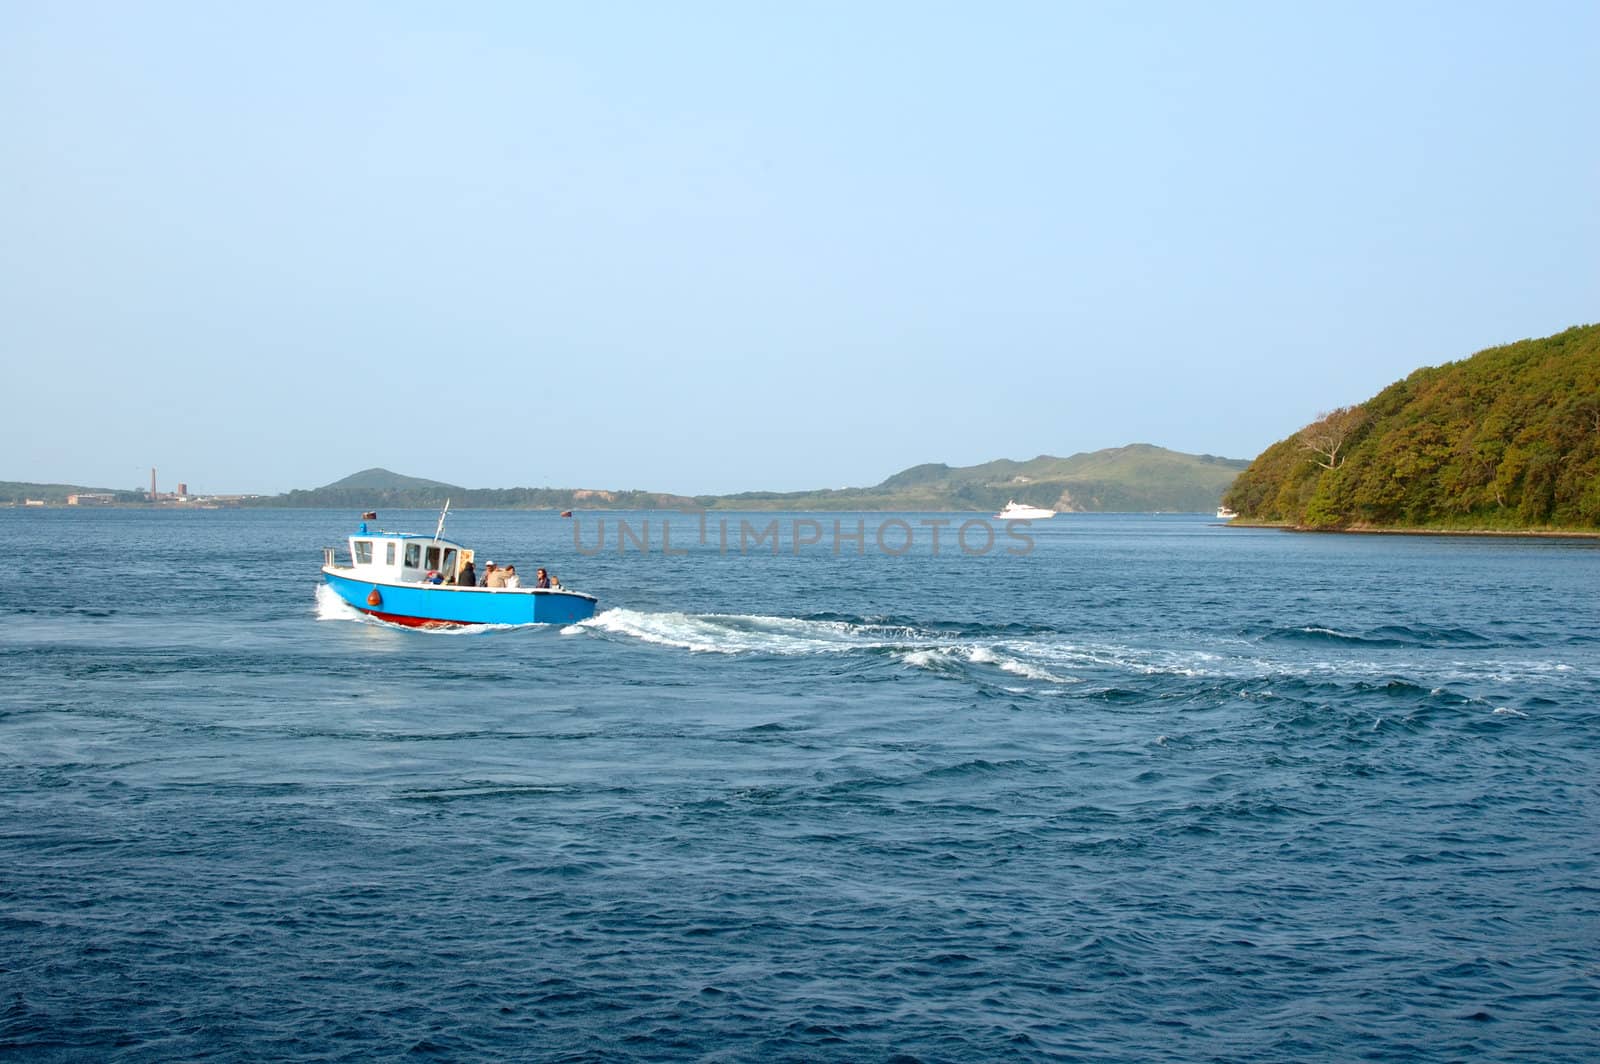 Sea scenery with blue motor-boat.